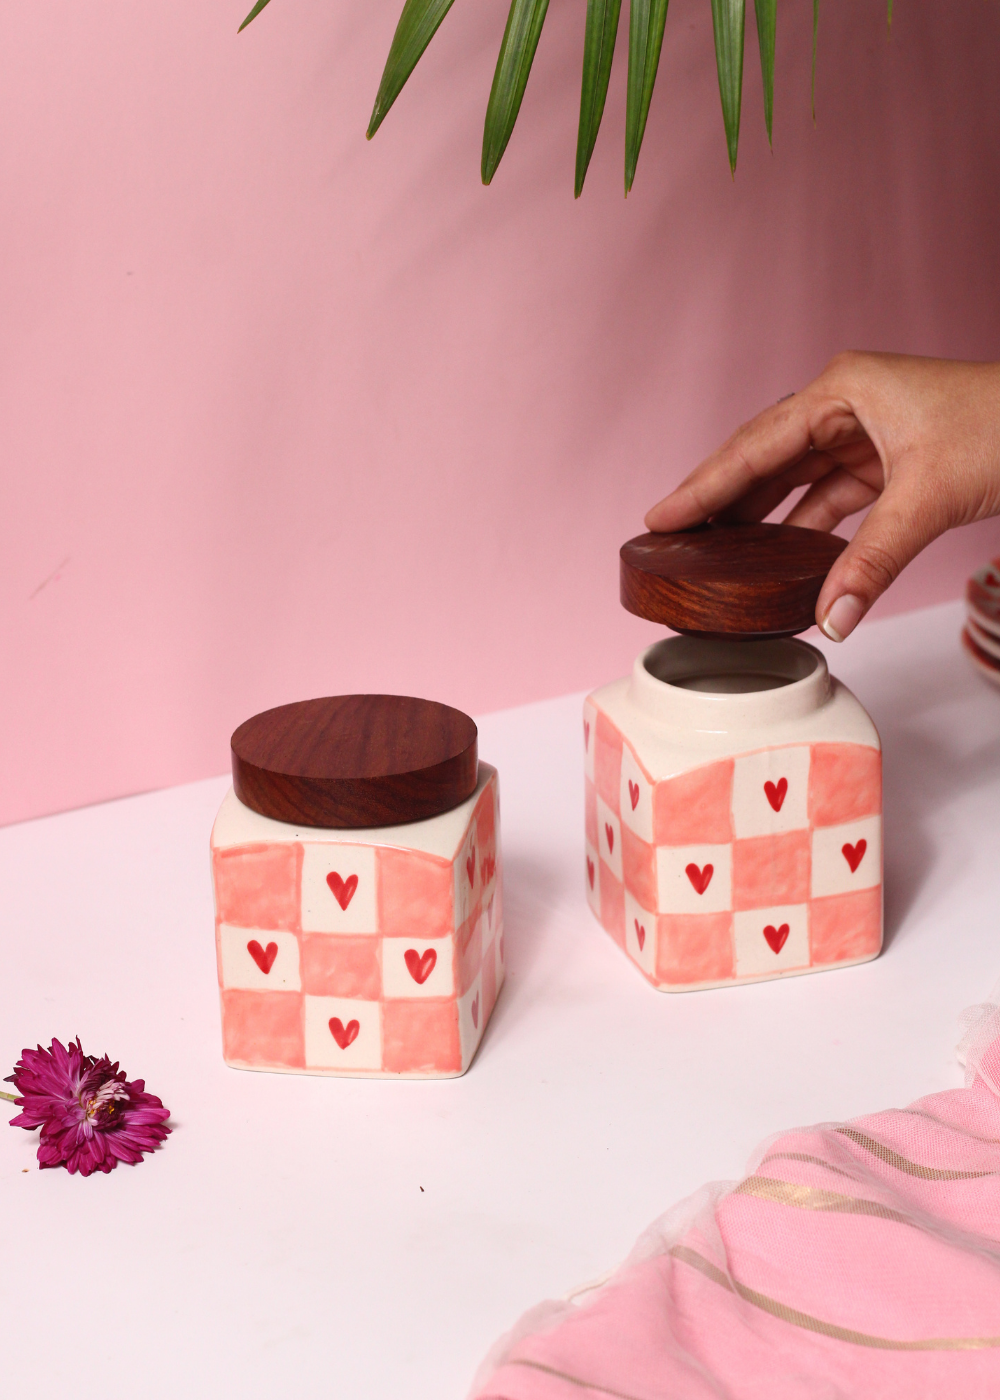 Chequered heart jars and lid in a hand